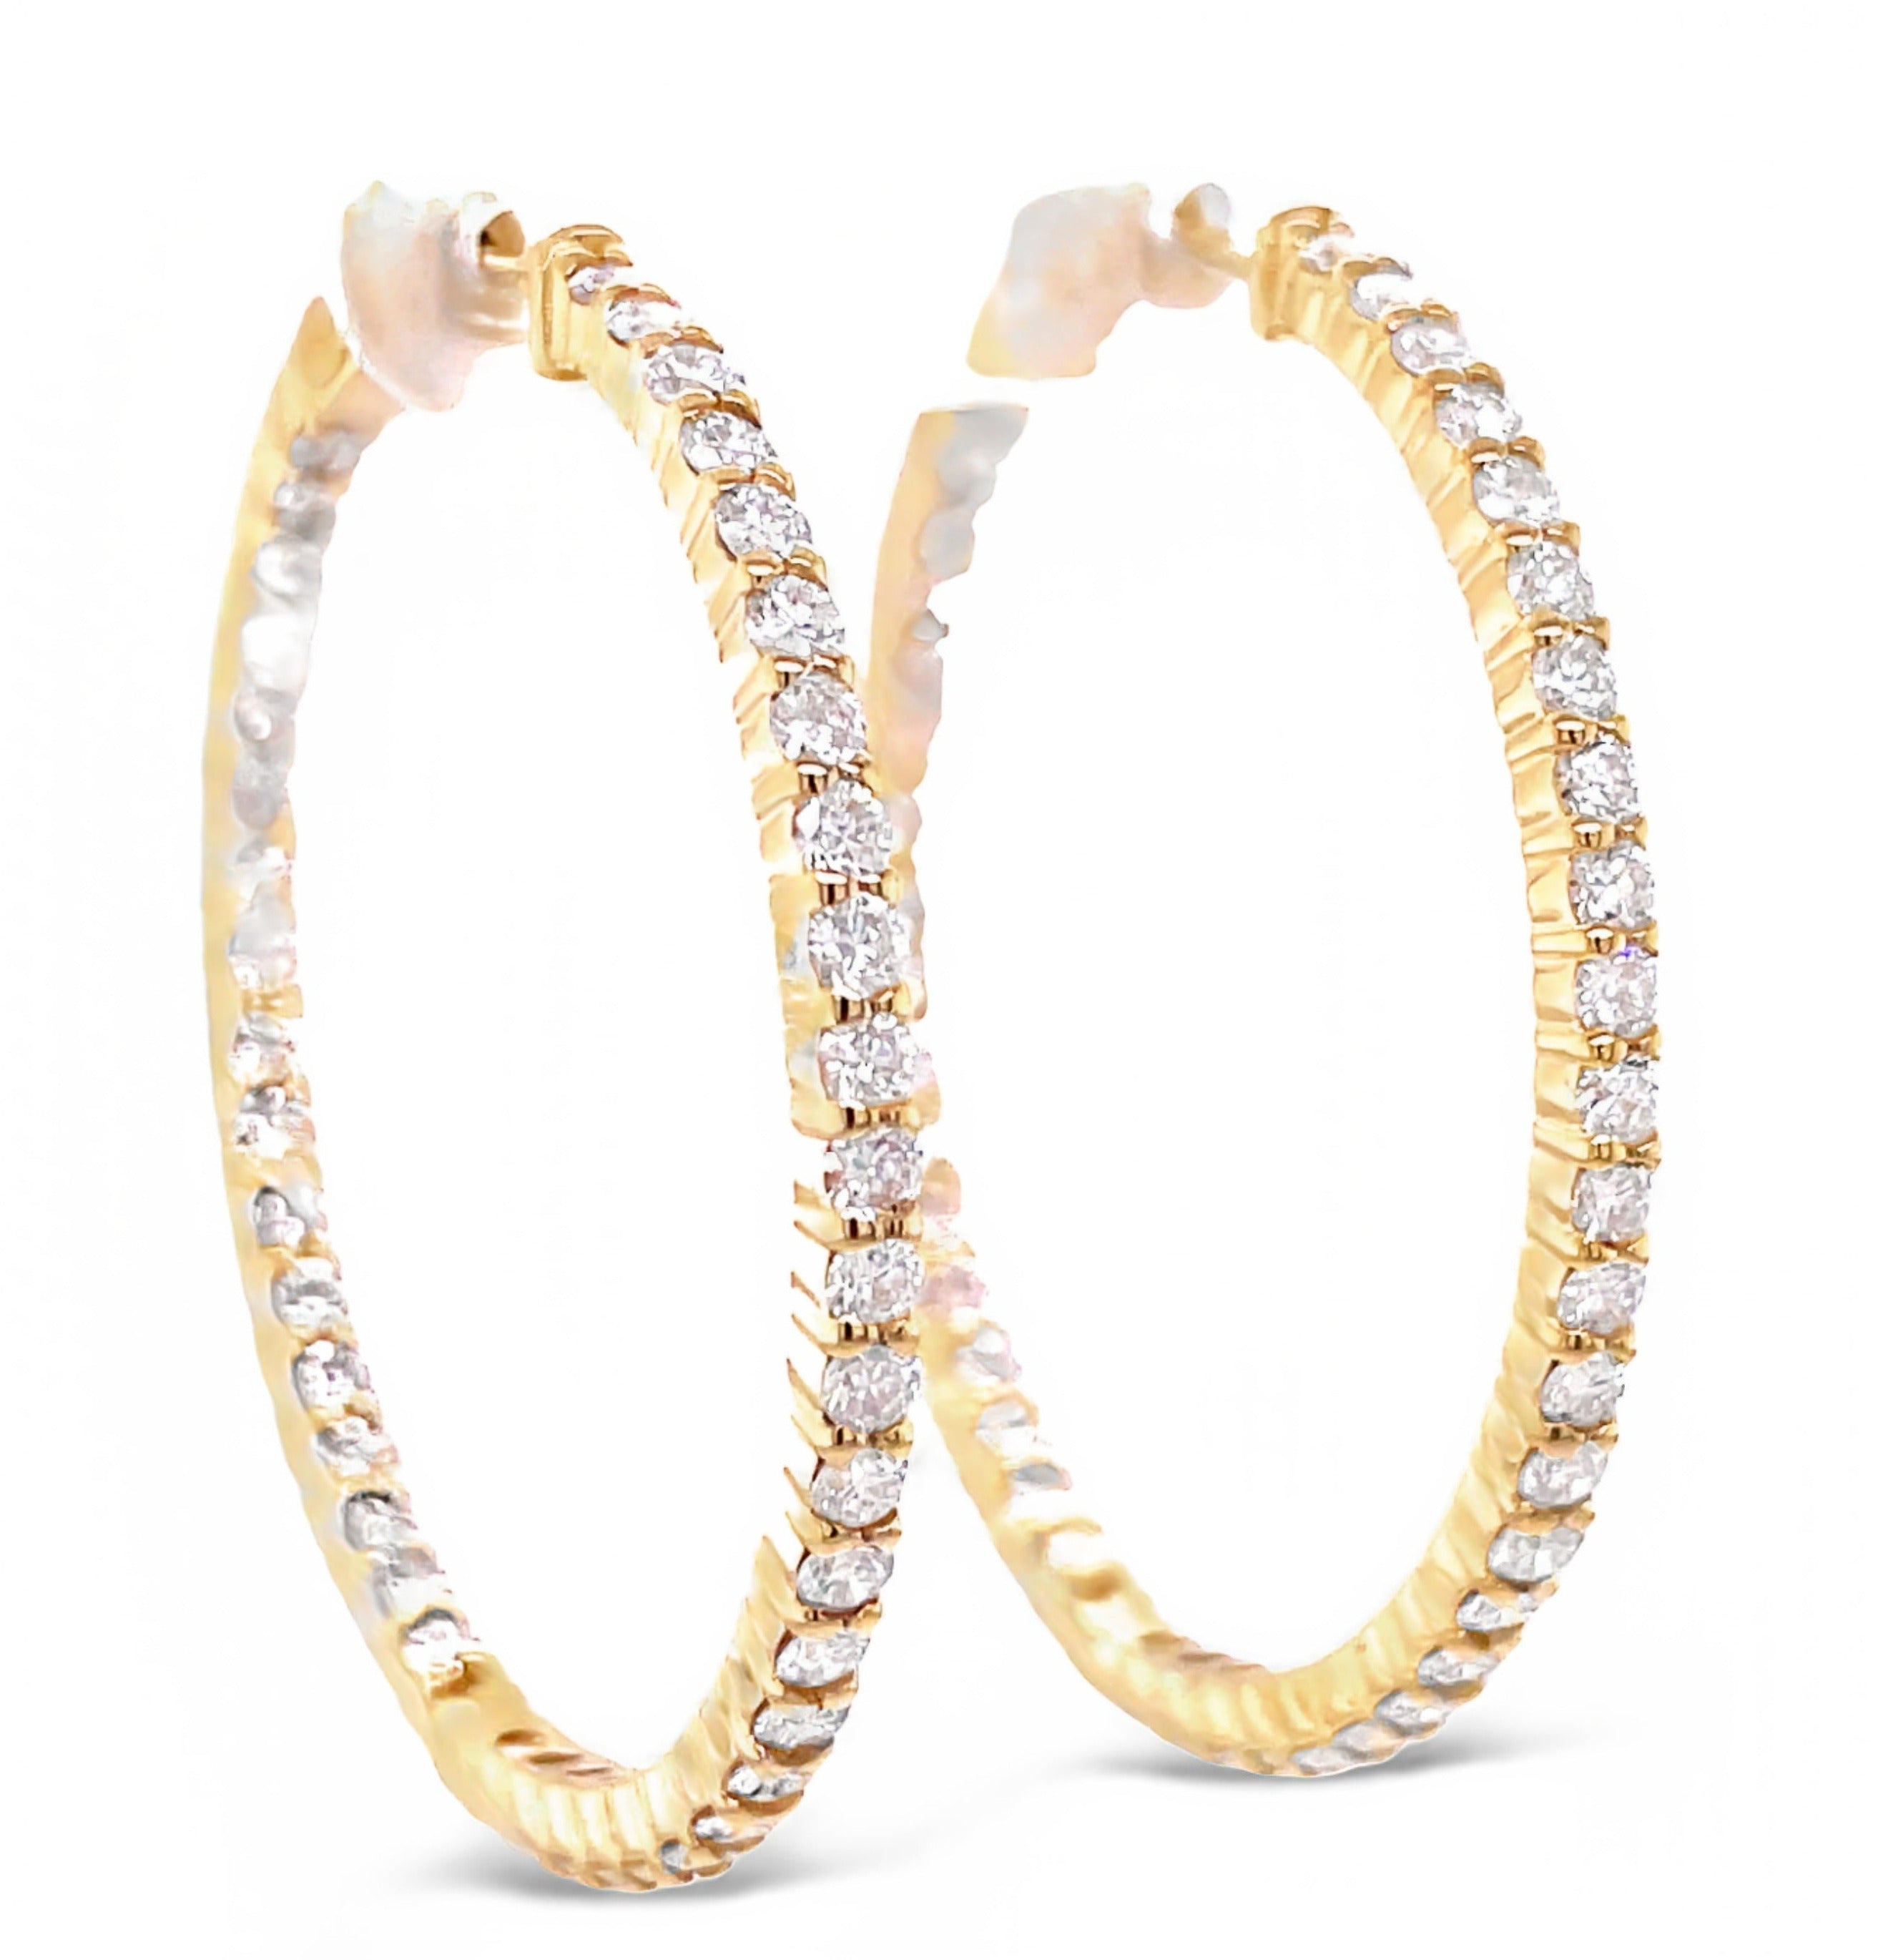 Large hoops   2.00 mm thickness  30.00 mm long  Round diamonds 1.88 cts  F/G color  VS1 clarity  Secure & easy lever back system  14k yellow gold  Secure lock clasp